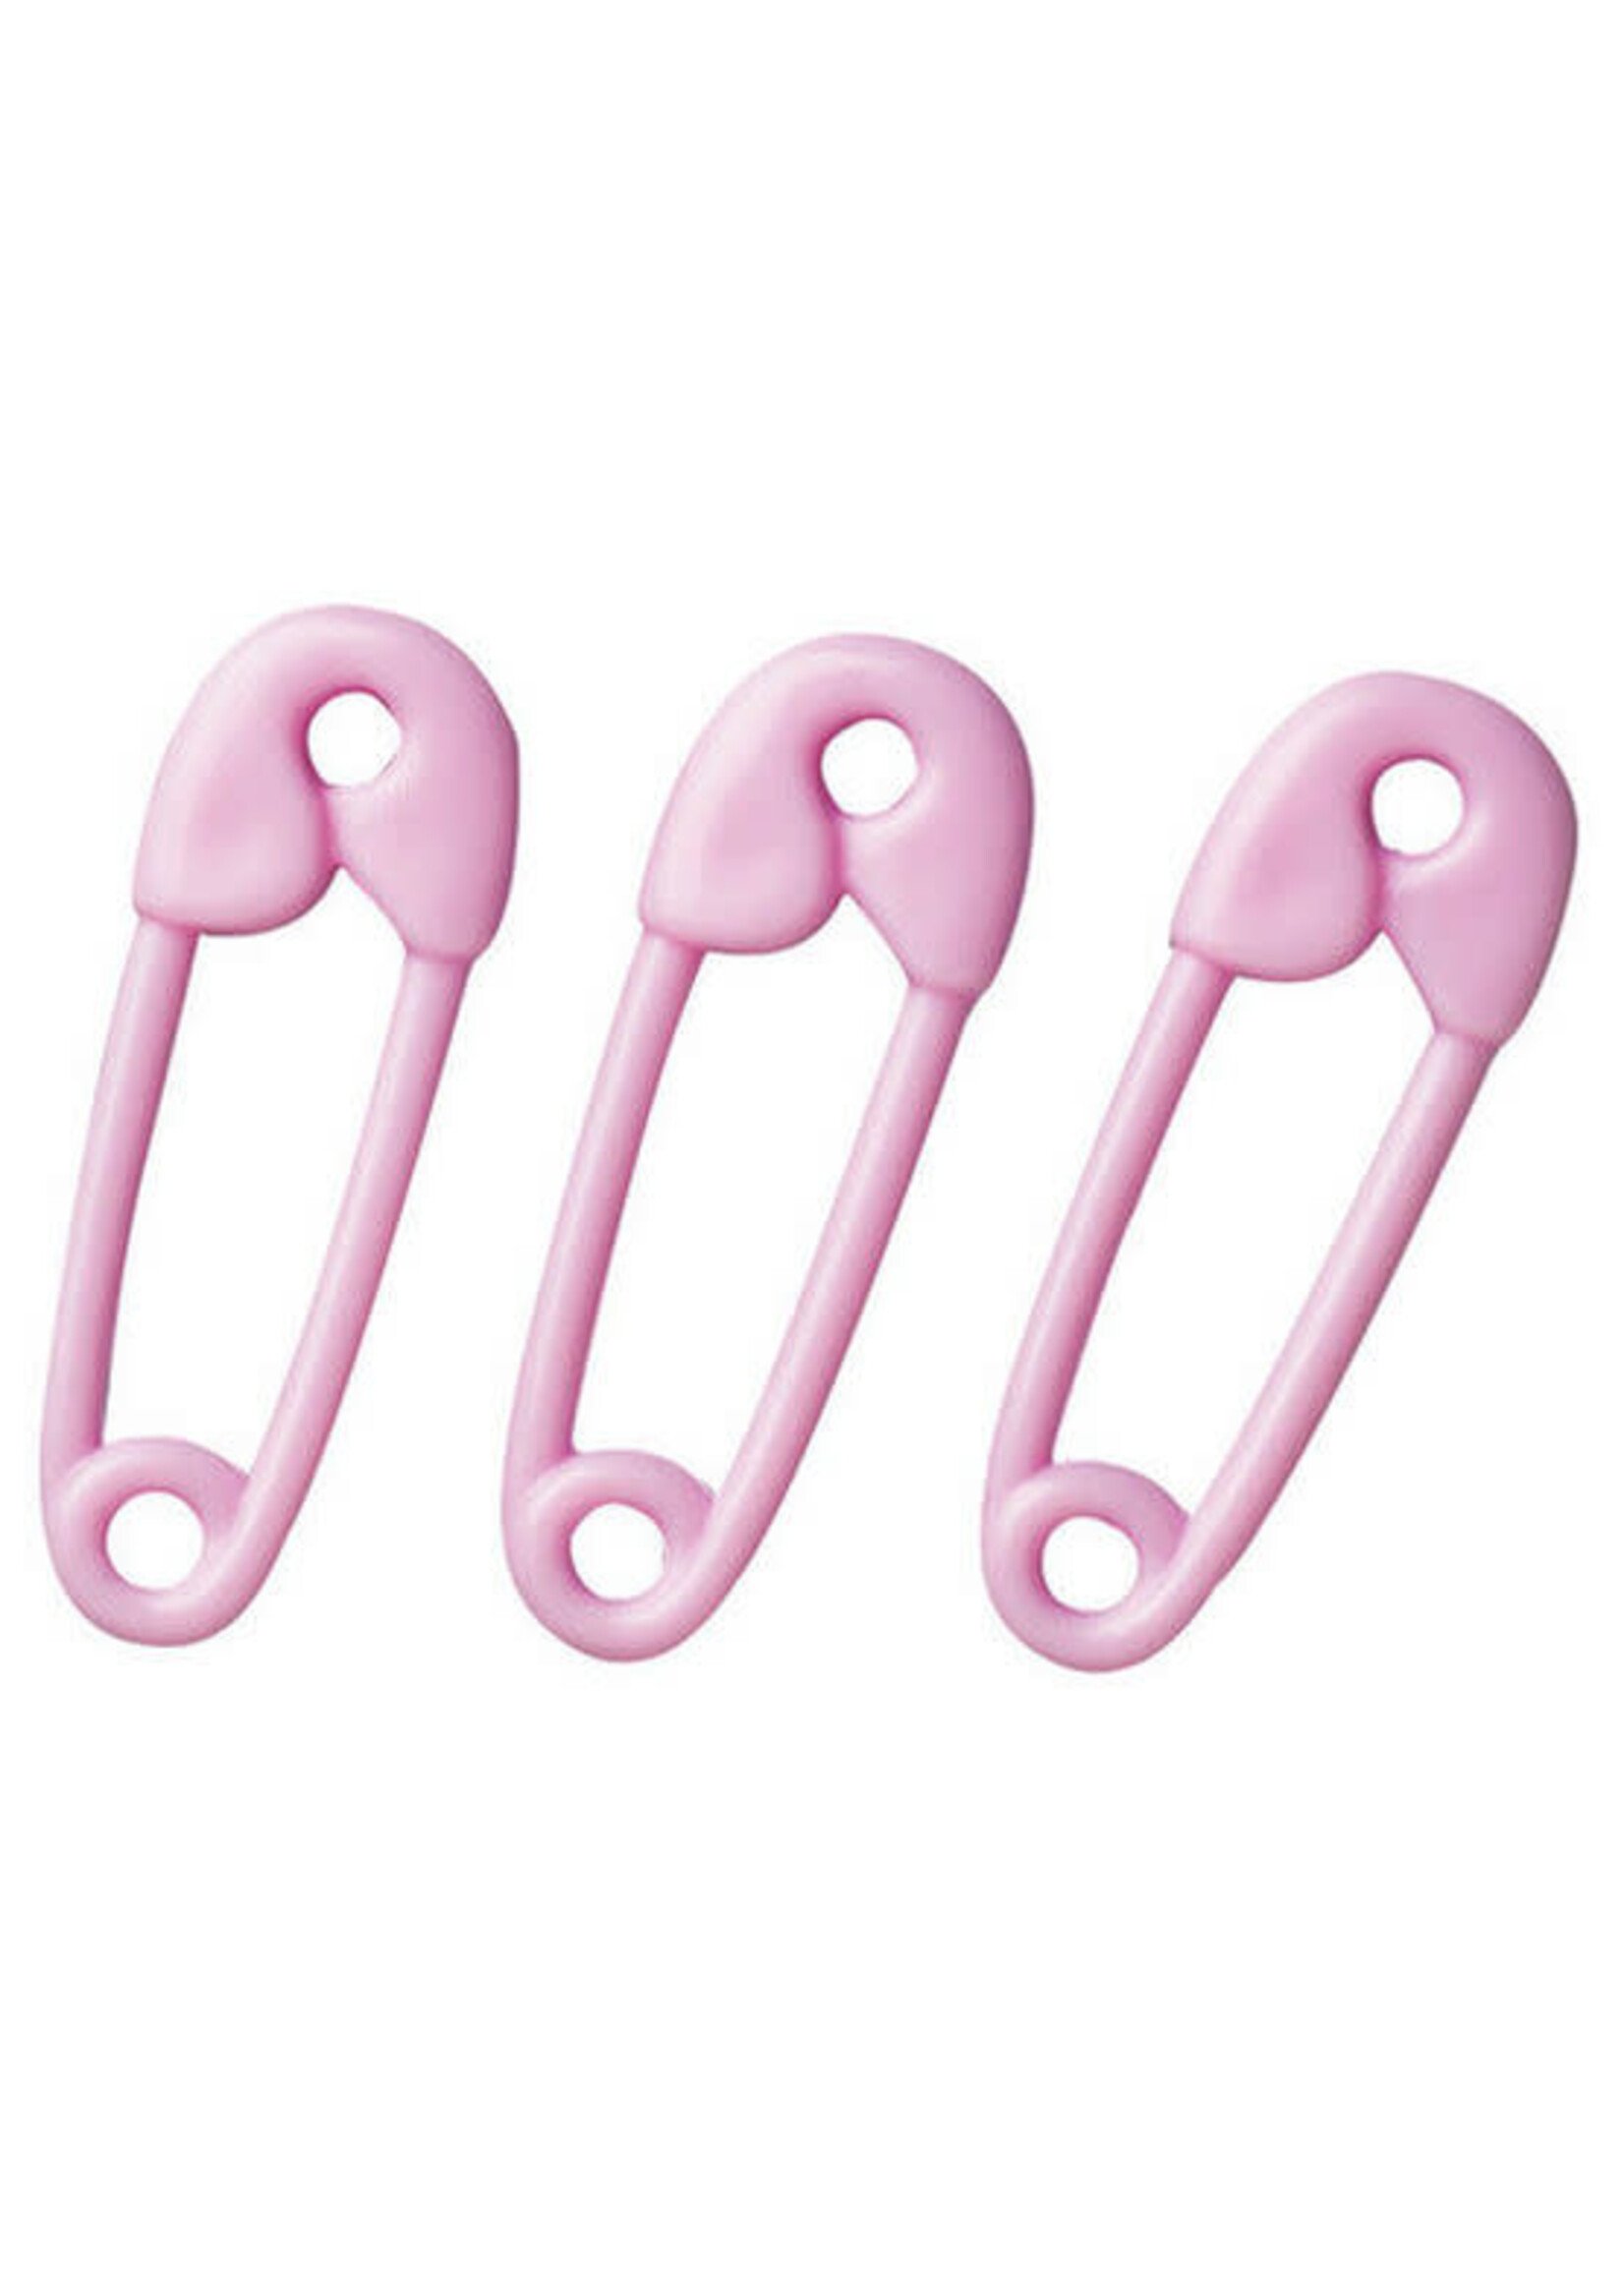 PINK SAFETY PINS 20CT